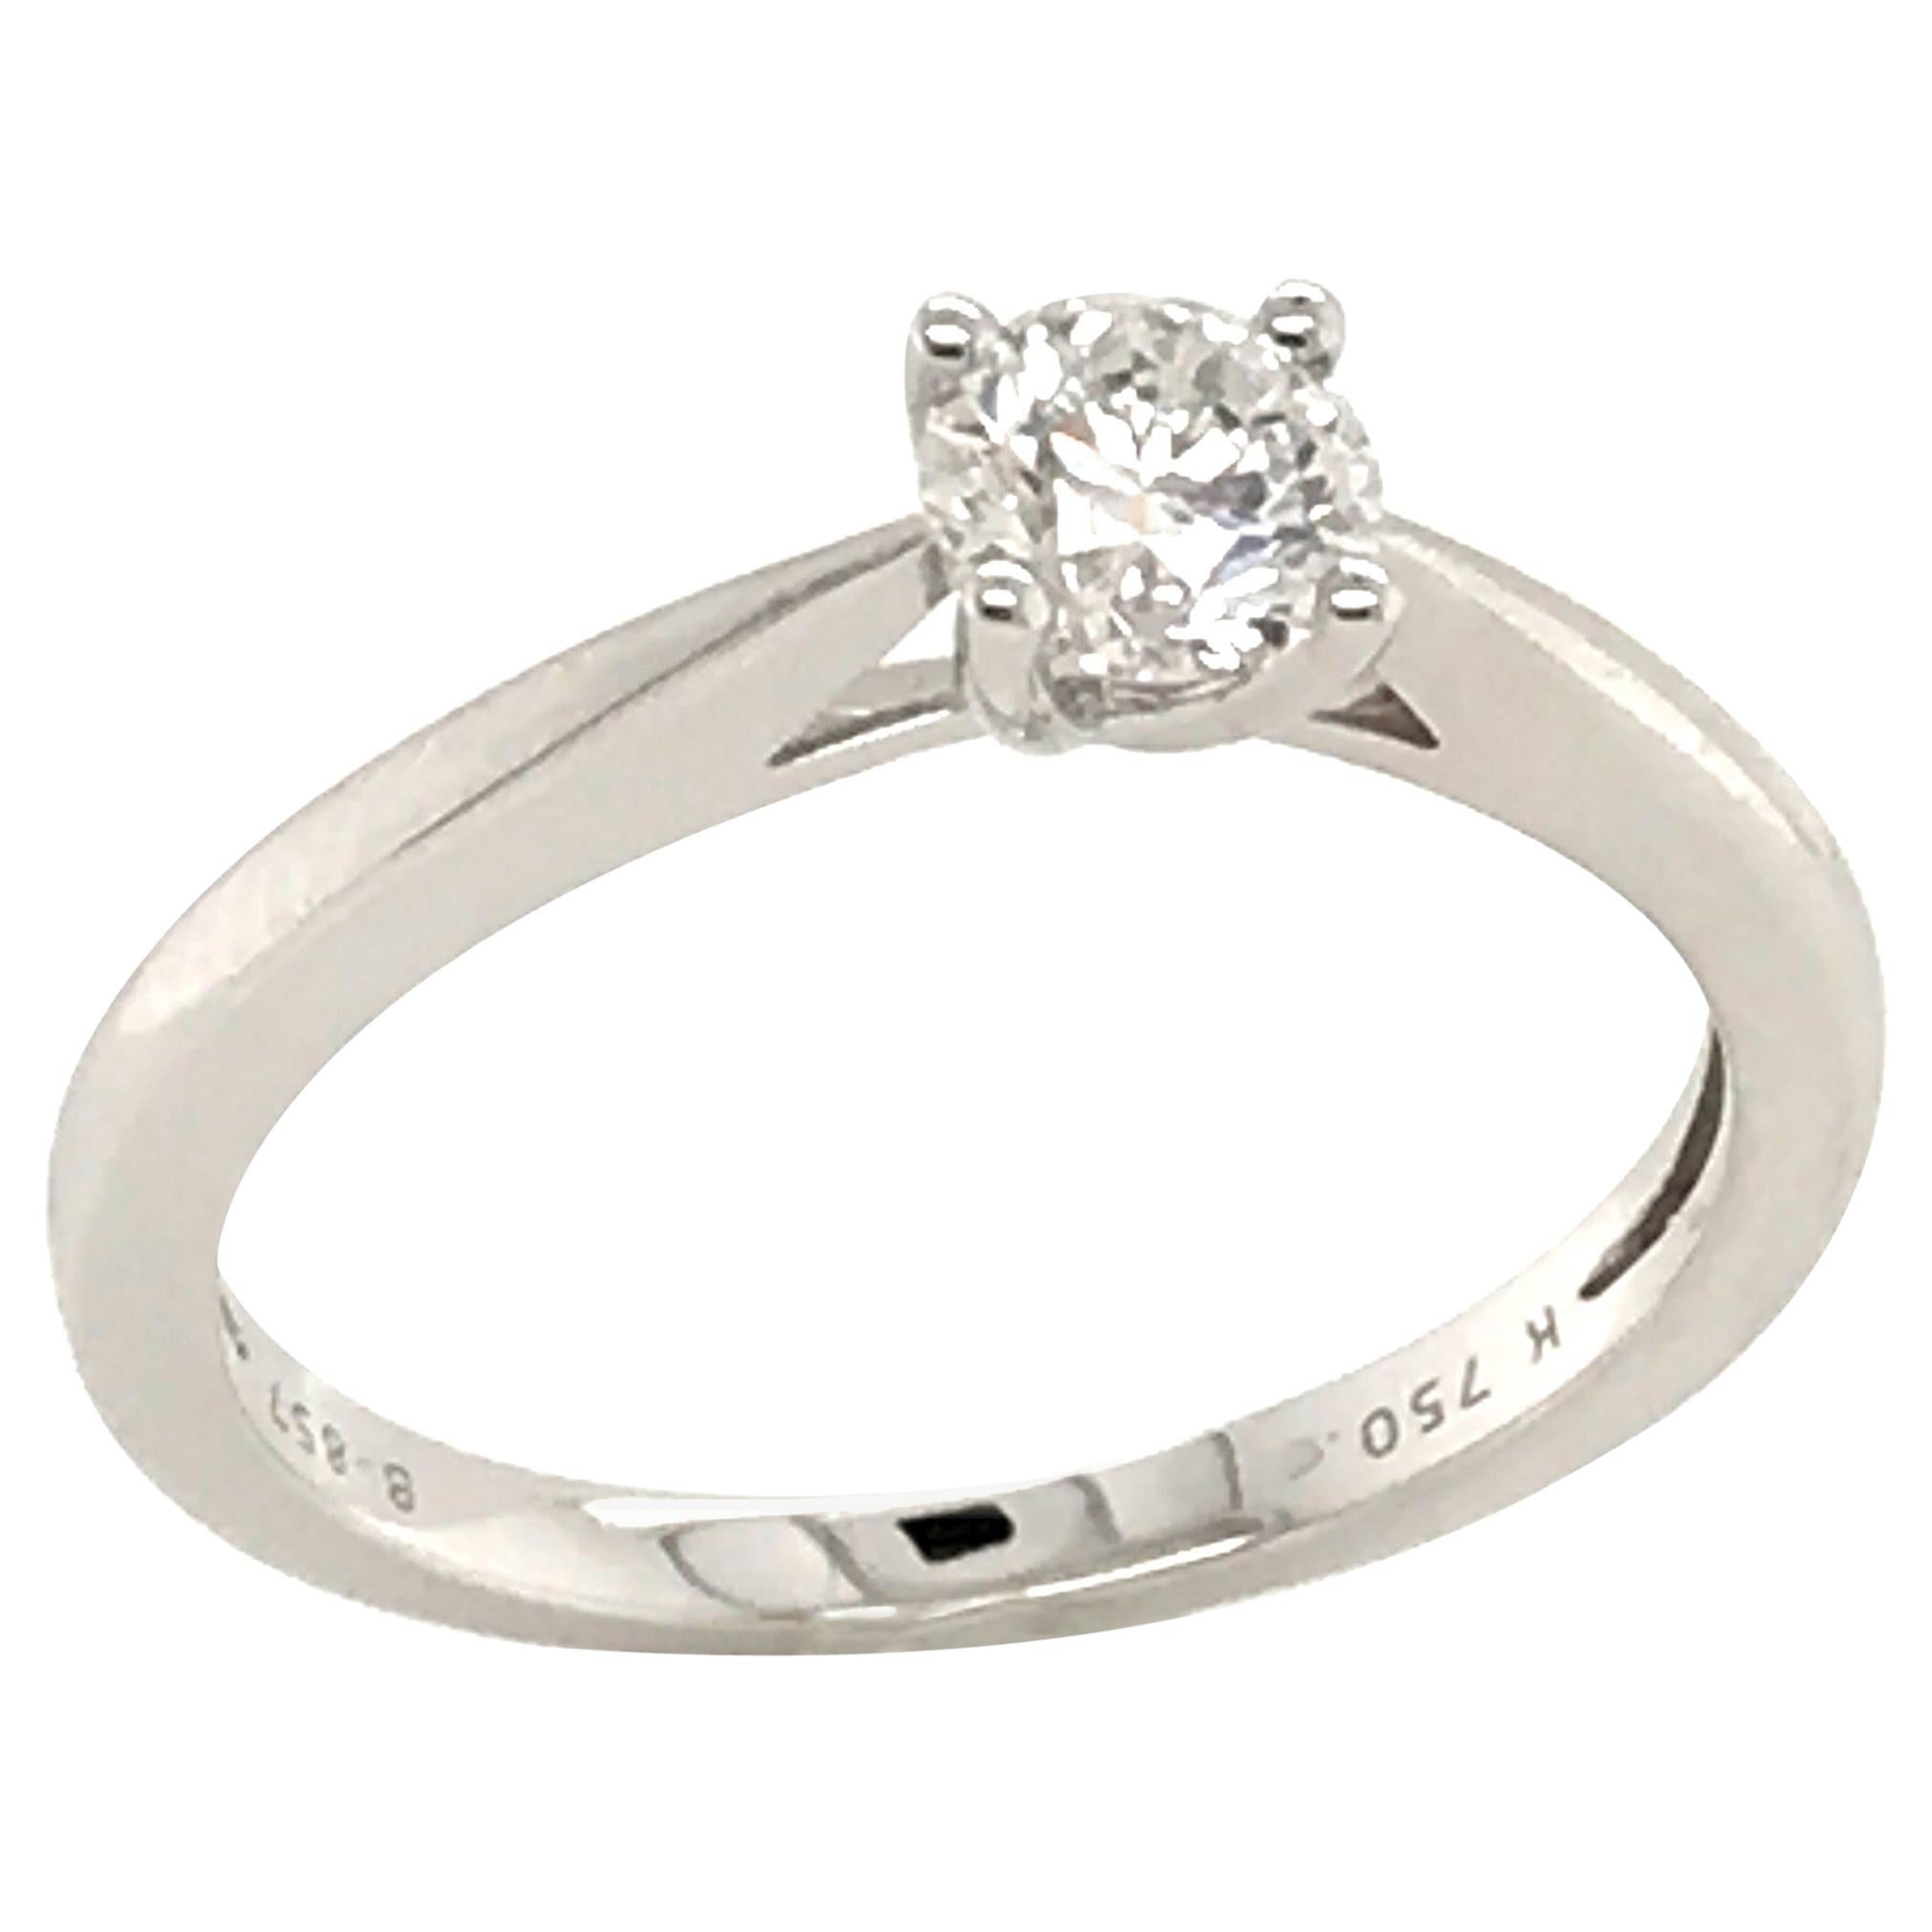 Solitaire Ring White Diamond Certified Color F White Gold 18 Karat